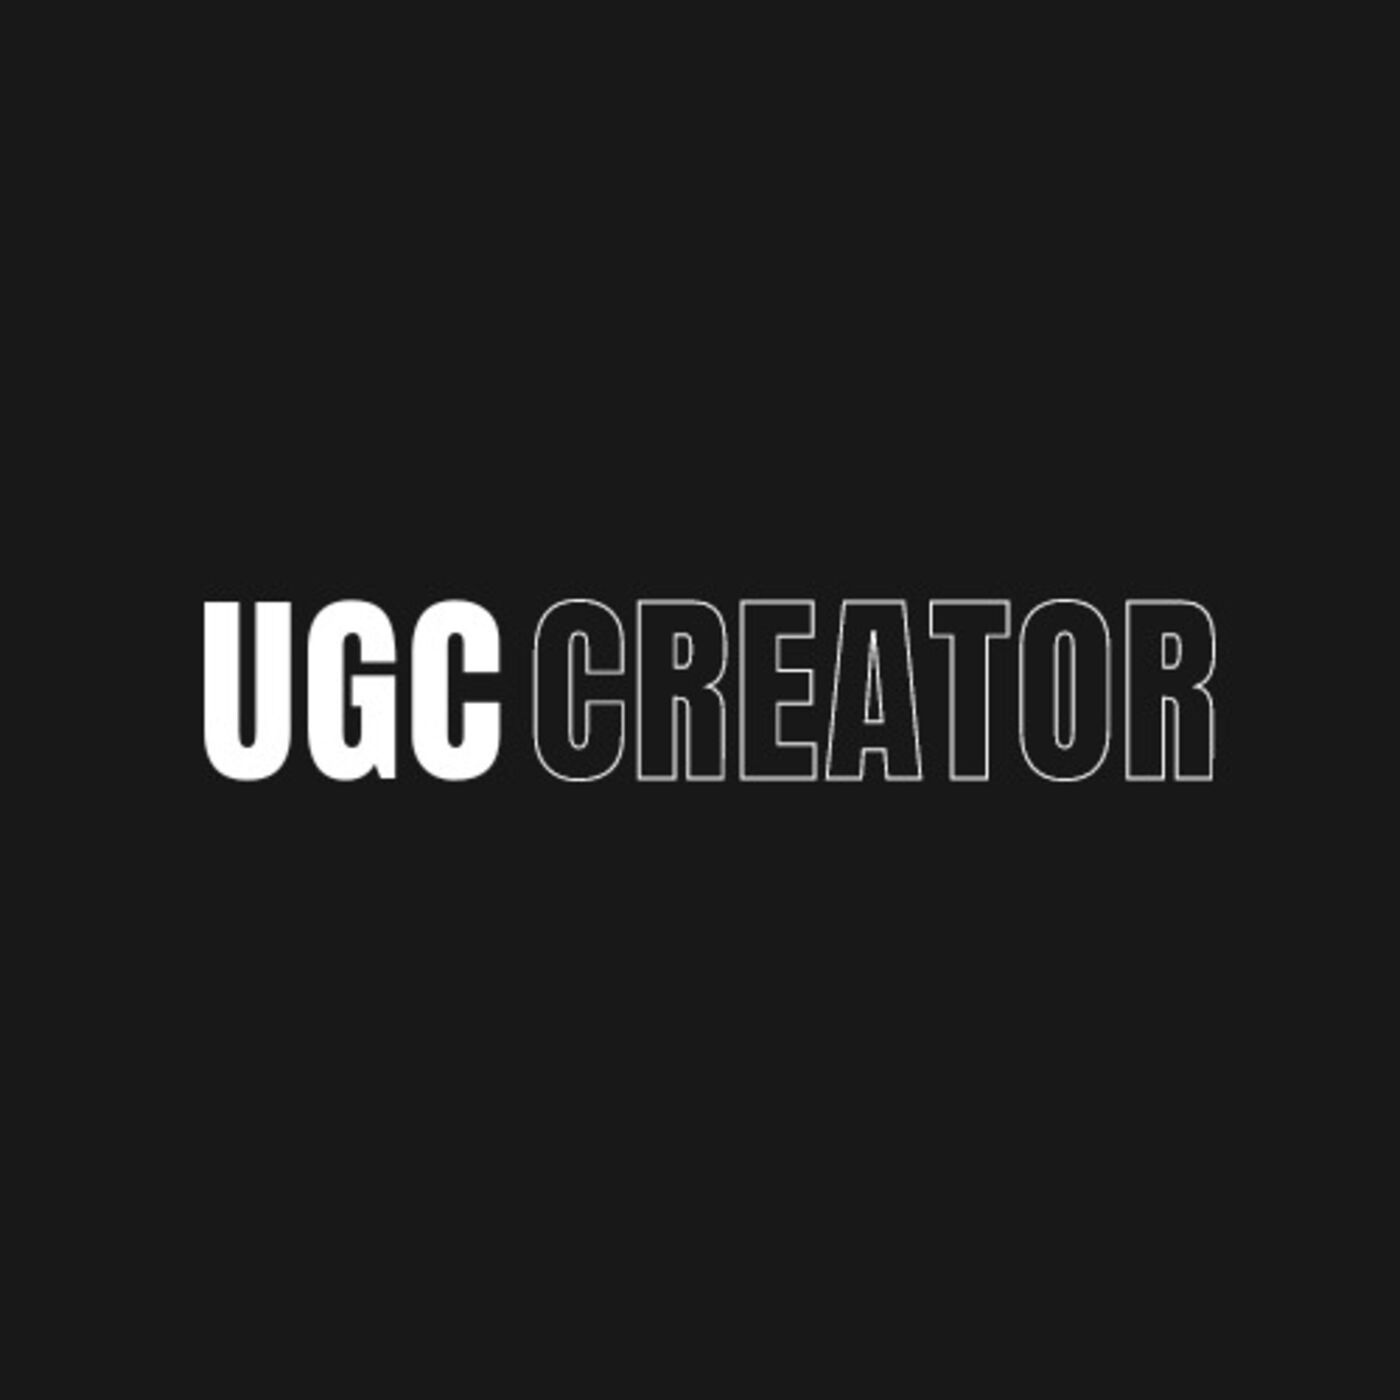 UGC Creator Passive Income: How Carly Crawford started content creation through her passion by vctr